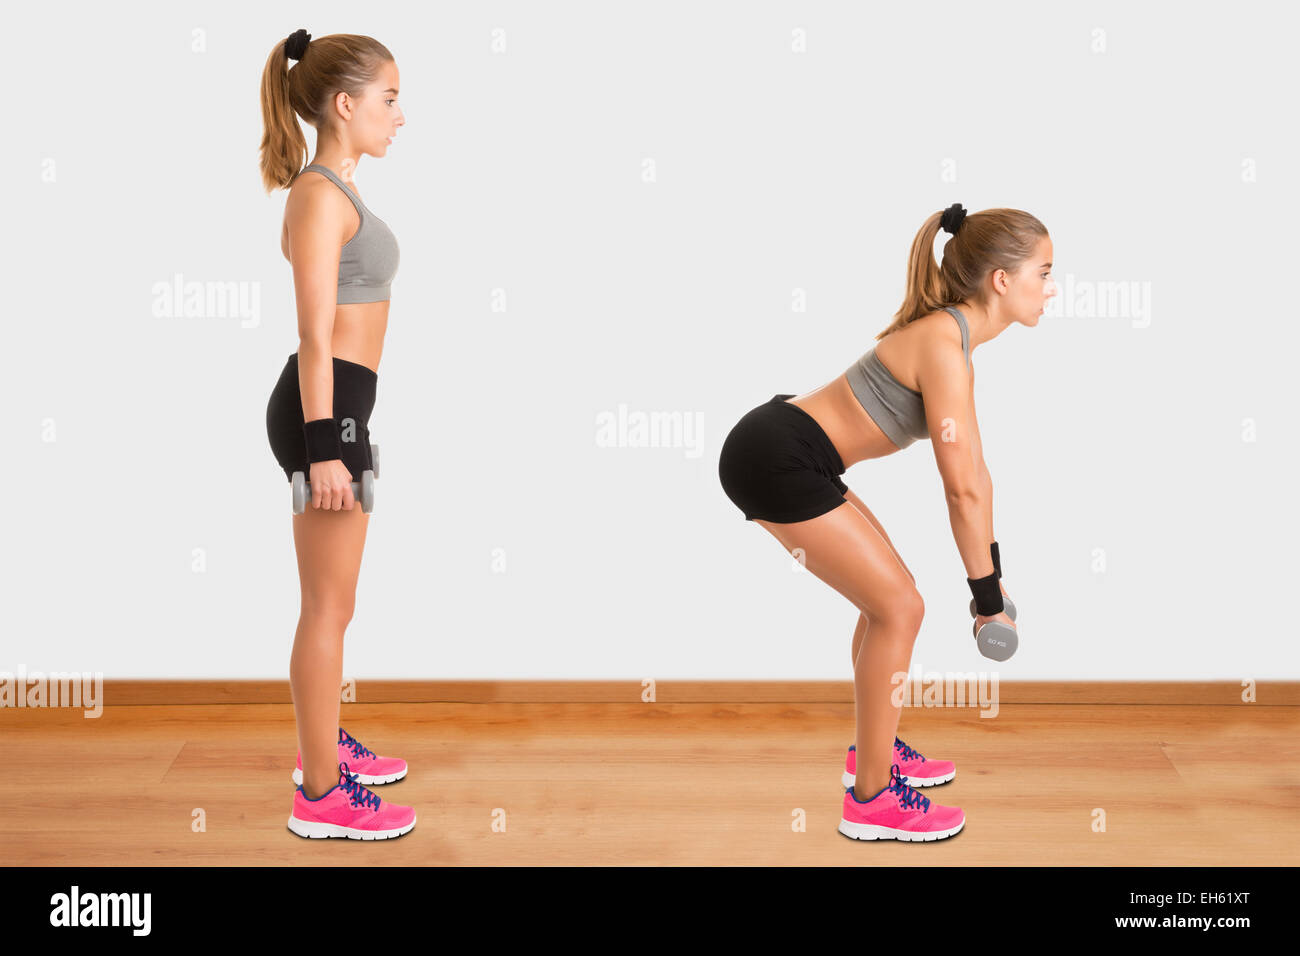 Female doing dumbbell deadlifts in a gym Stock Photo